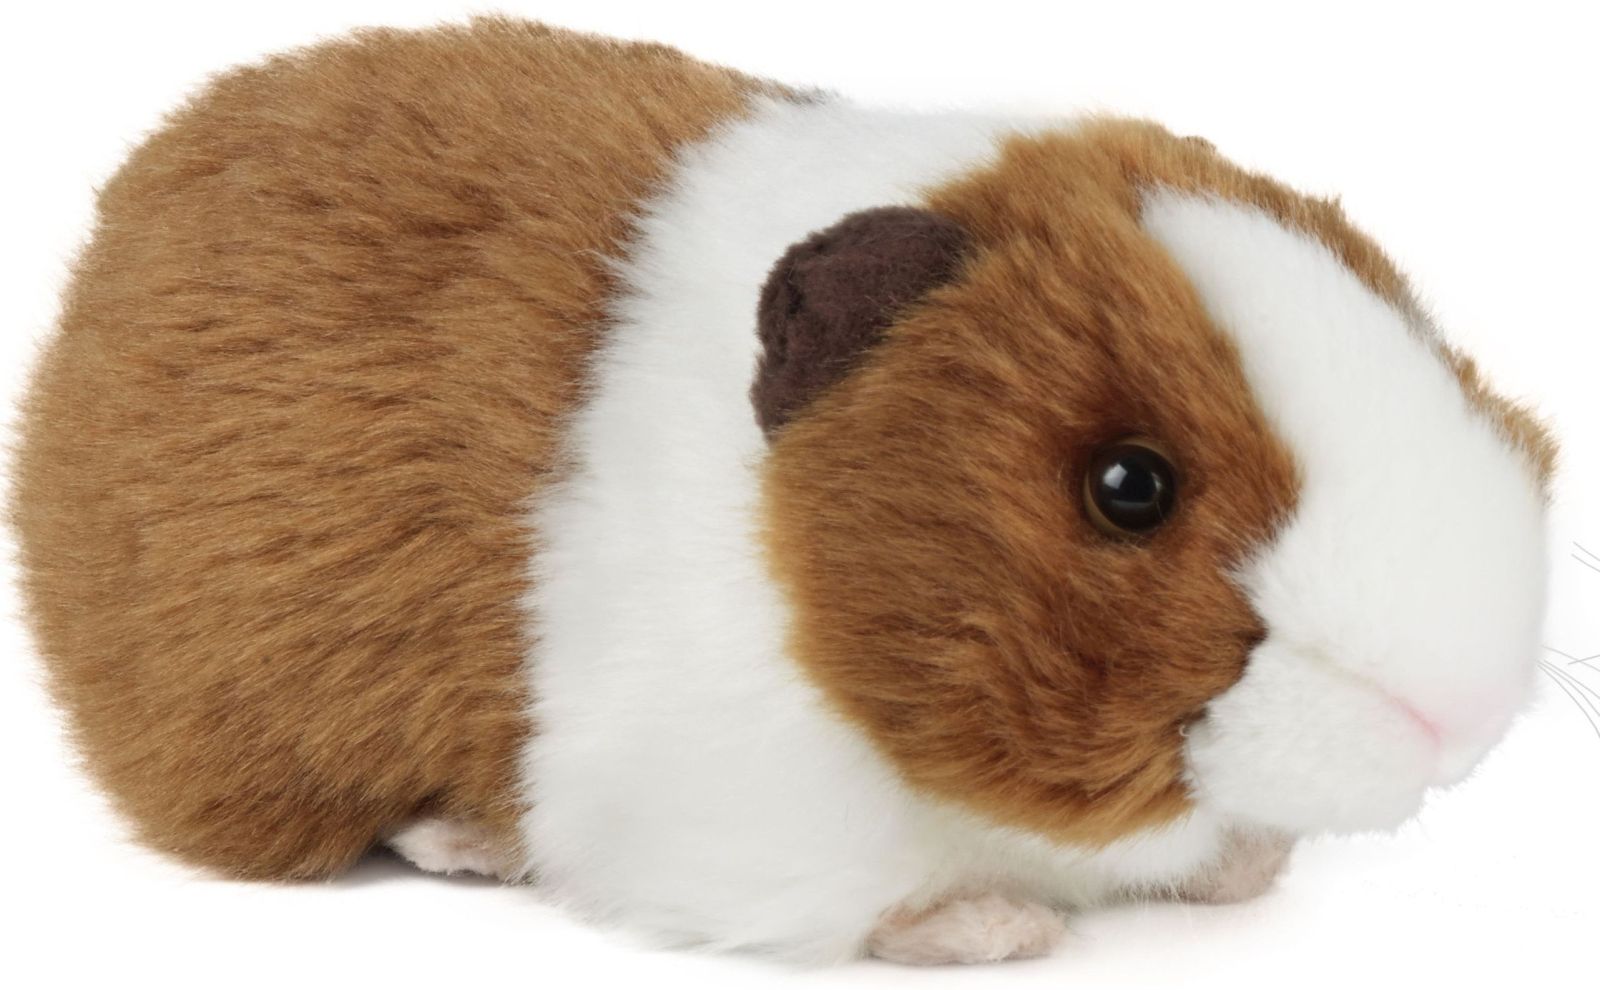 Living Nature Brown Guinea Pig with Sound